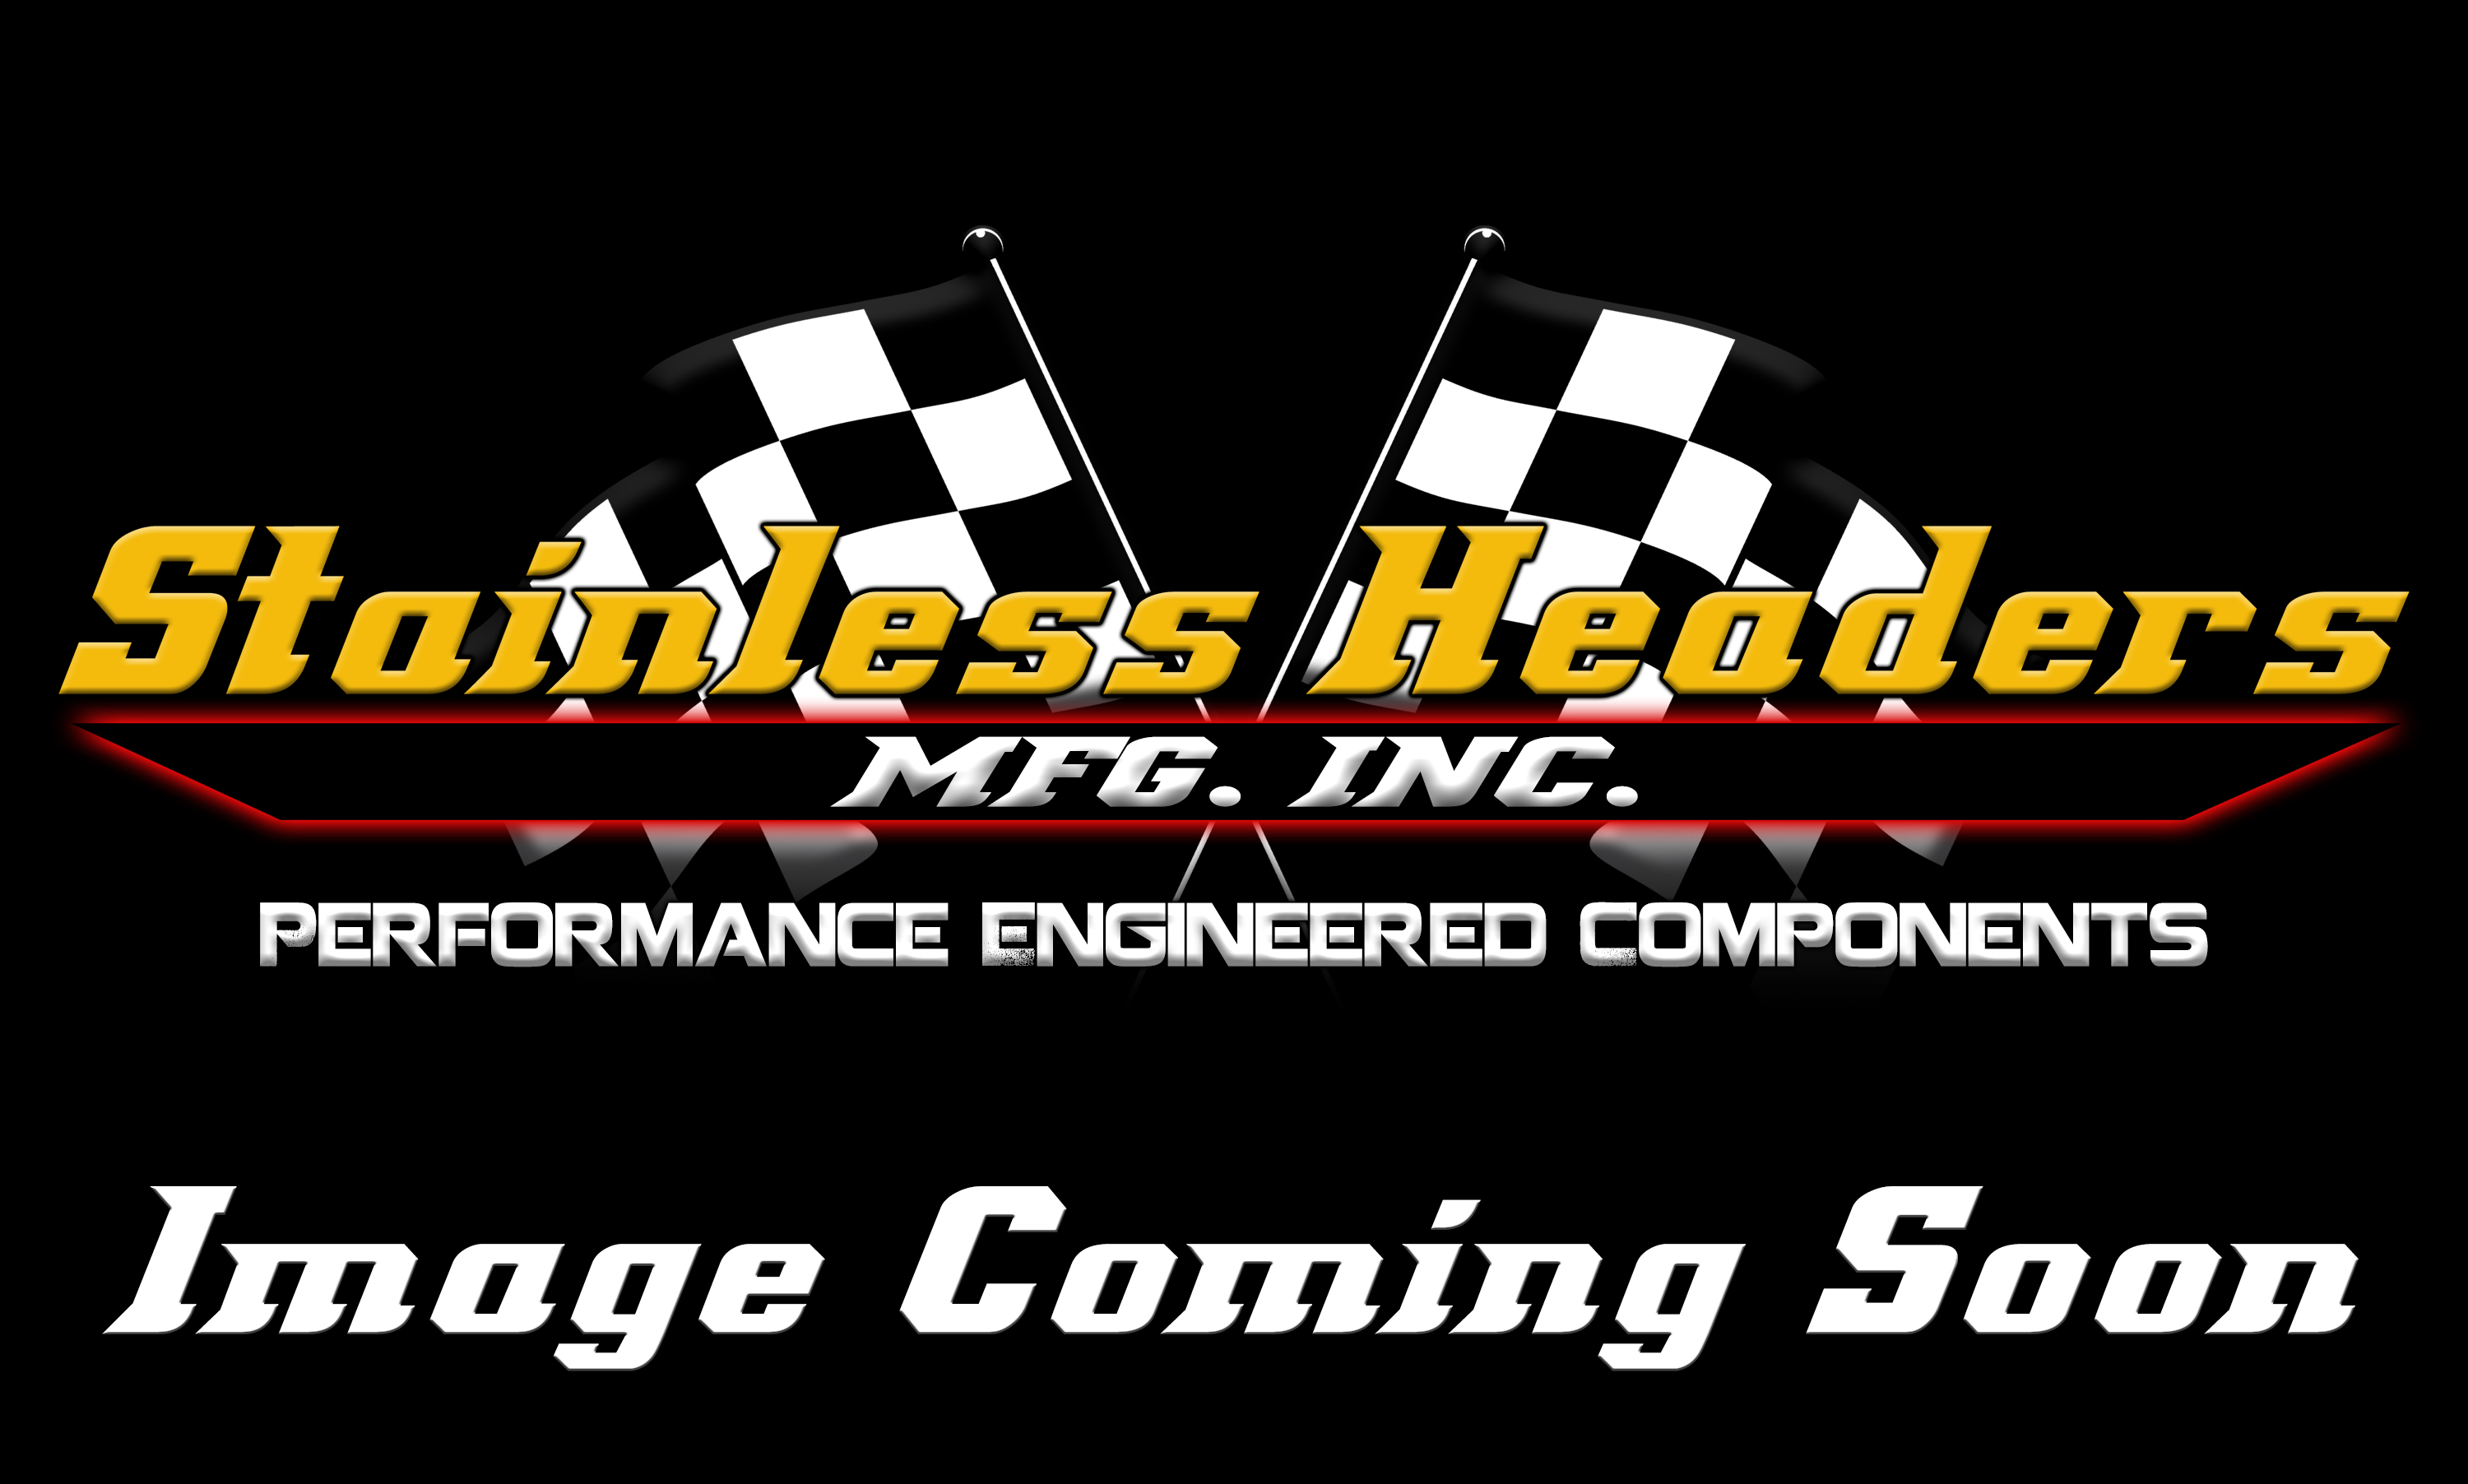 Stainless Headers - 1 7/8" Primary 3 into 1 Performance Merge Collector-16ga 321ss - Image 3